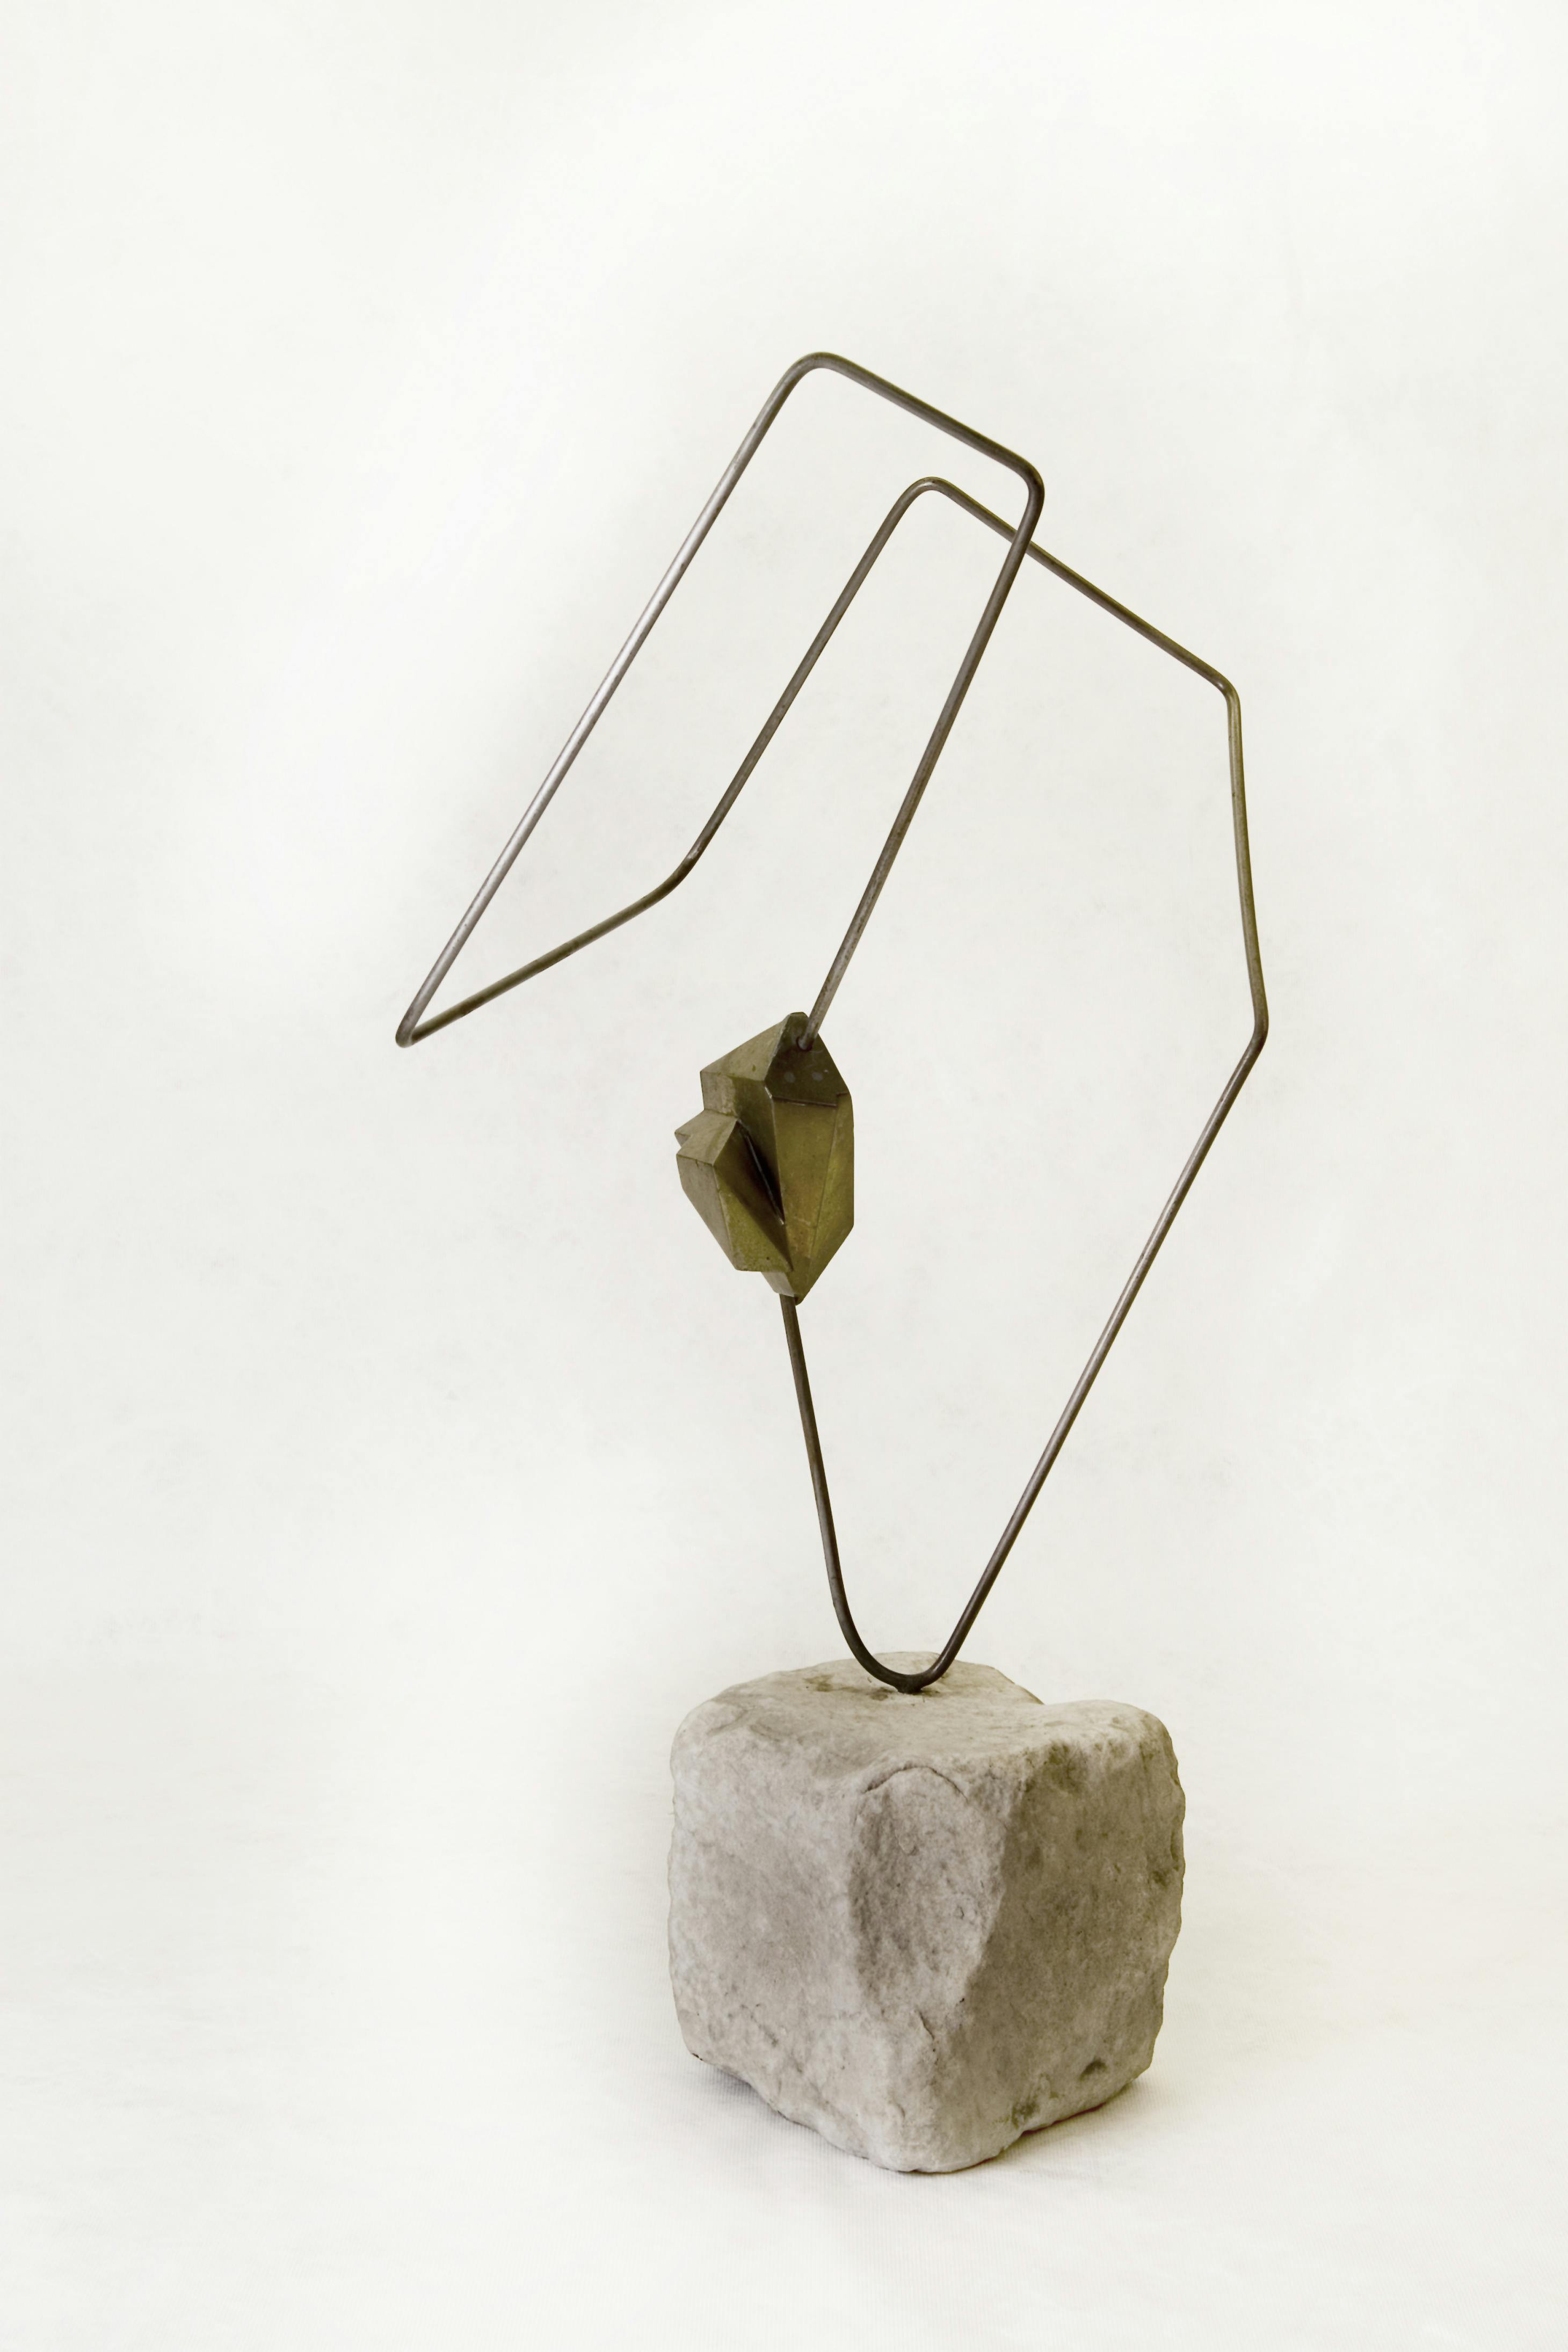 Image of abstract, free-standing sculpture by Enio Iommi.